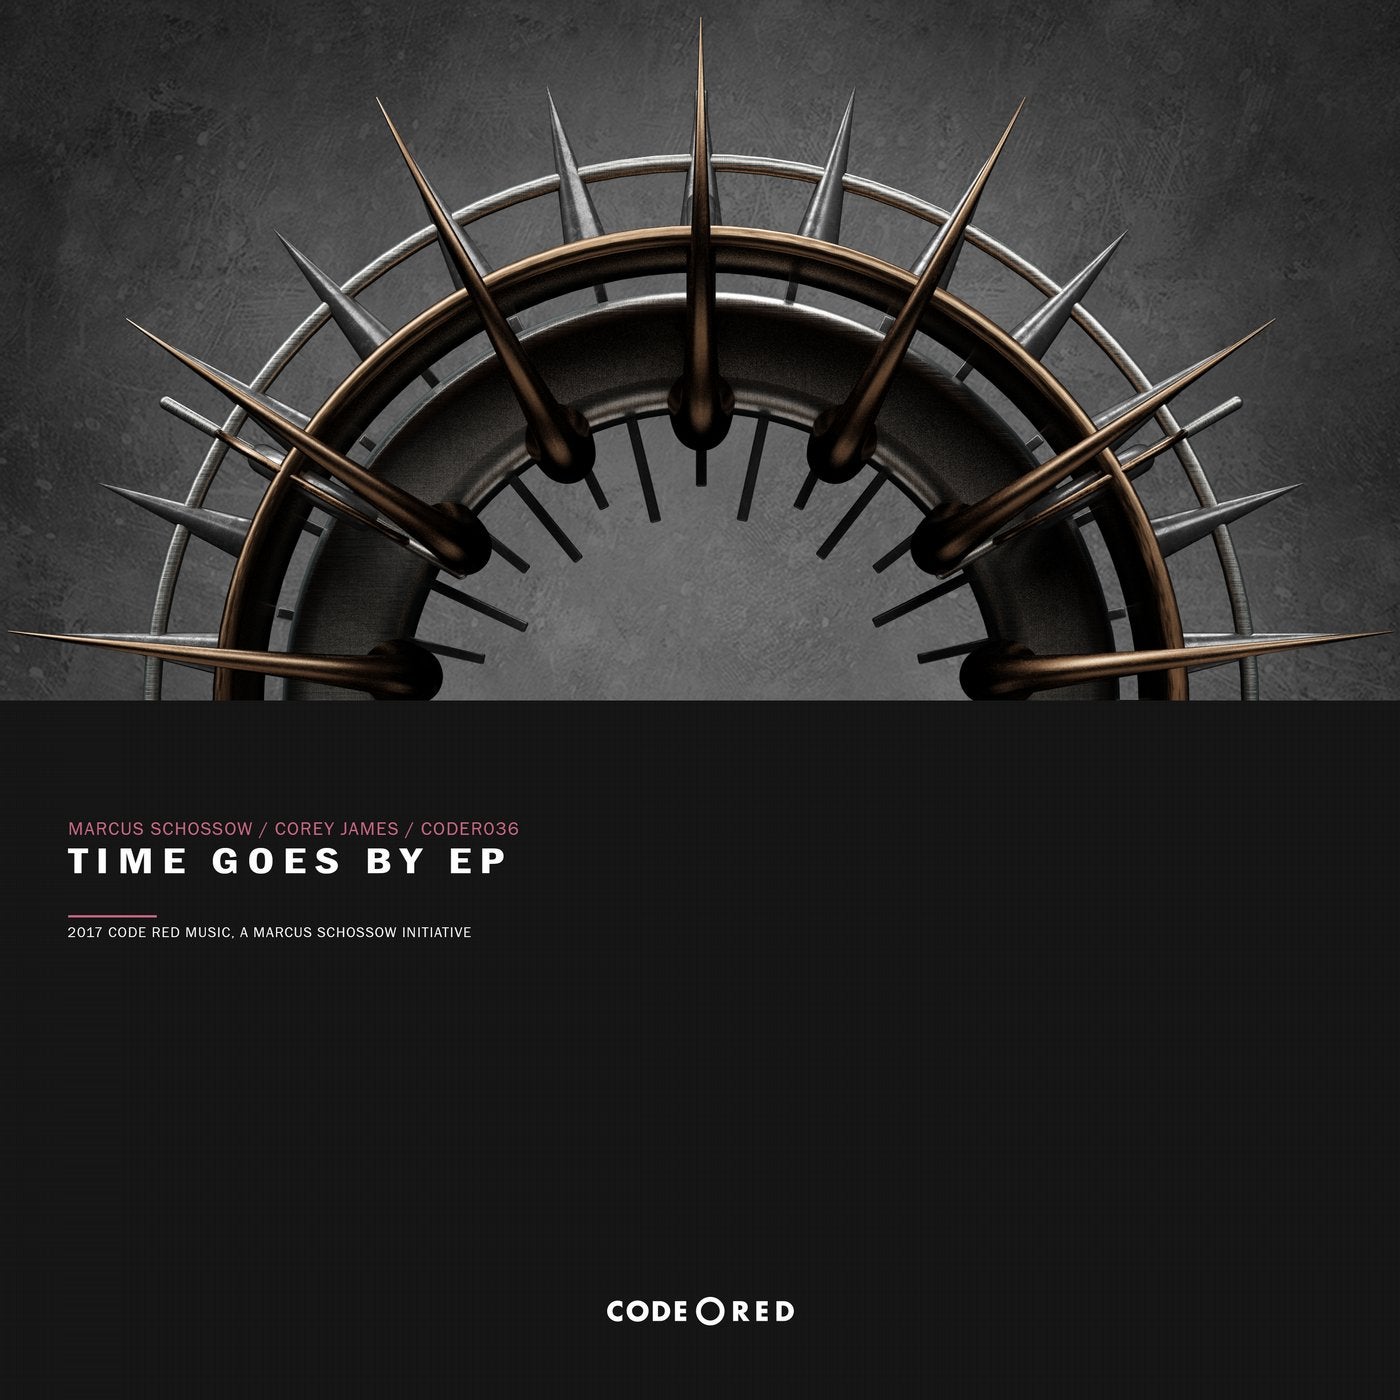 Time Goes by EP